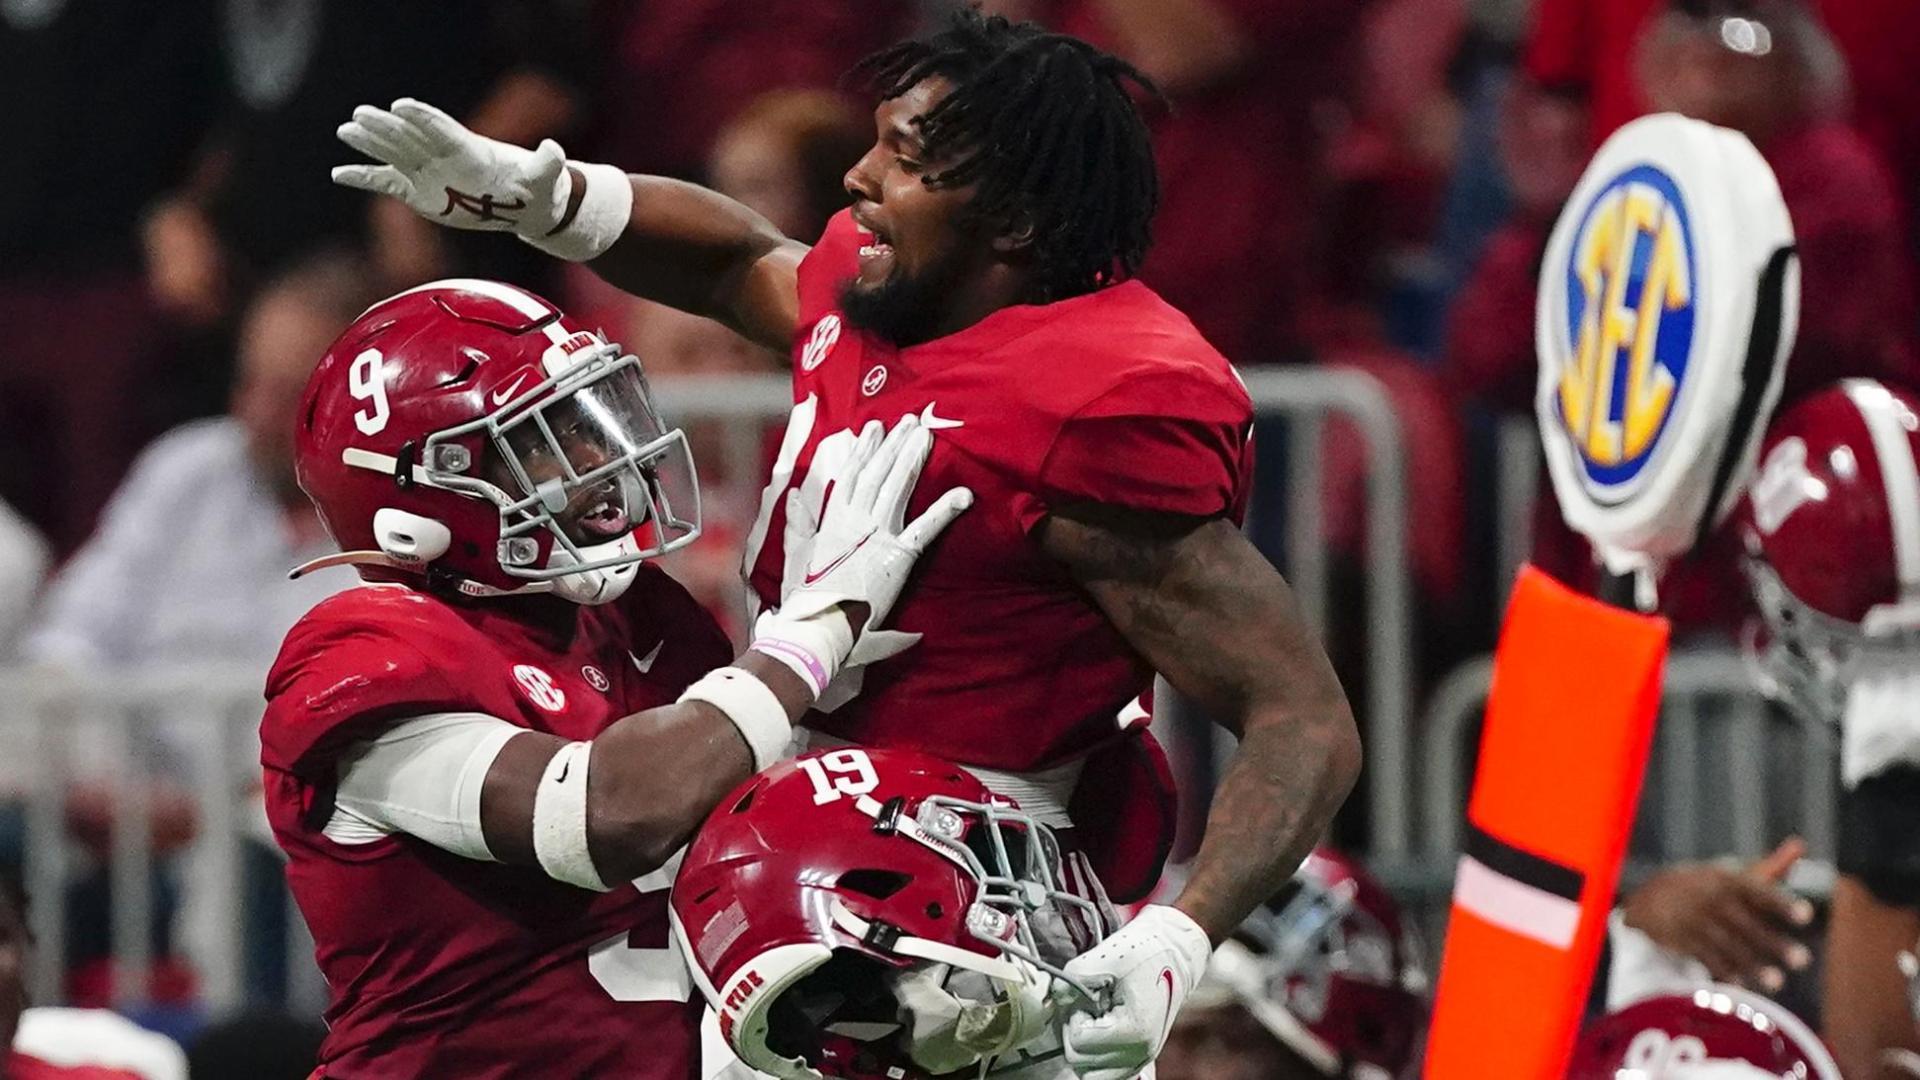 Bama breaks game open with pick-six in the 4th quarter